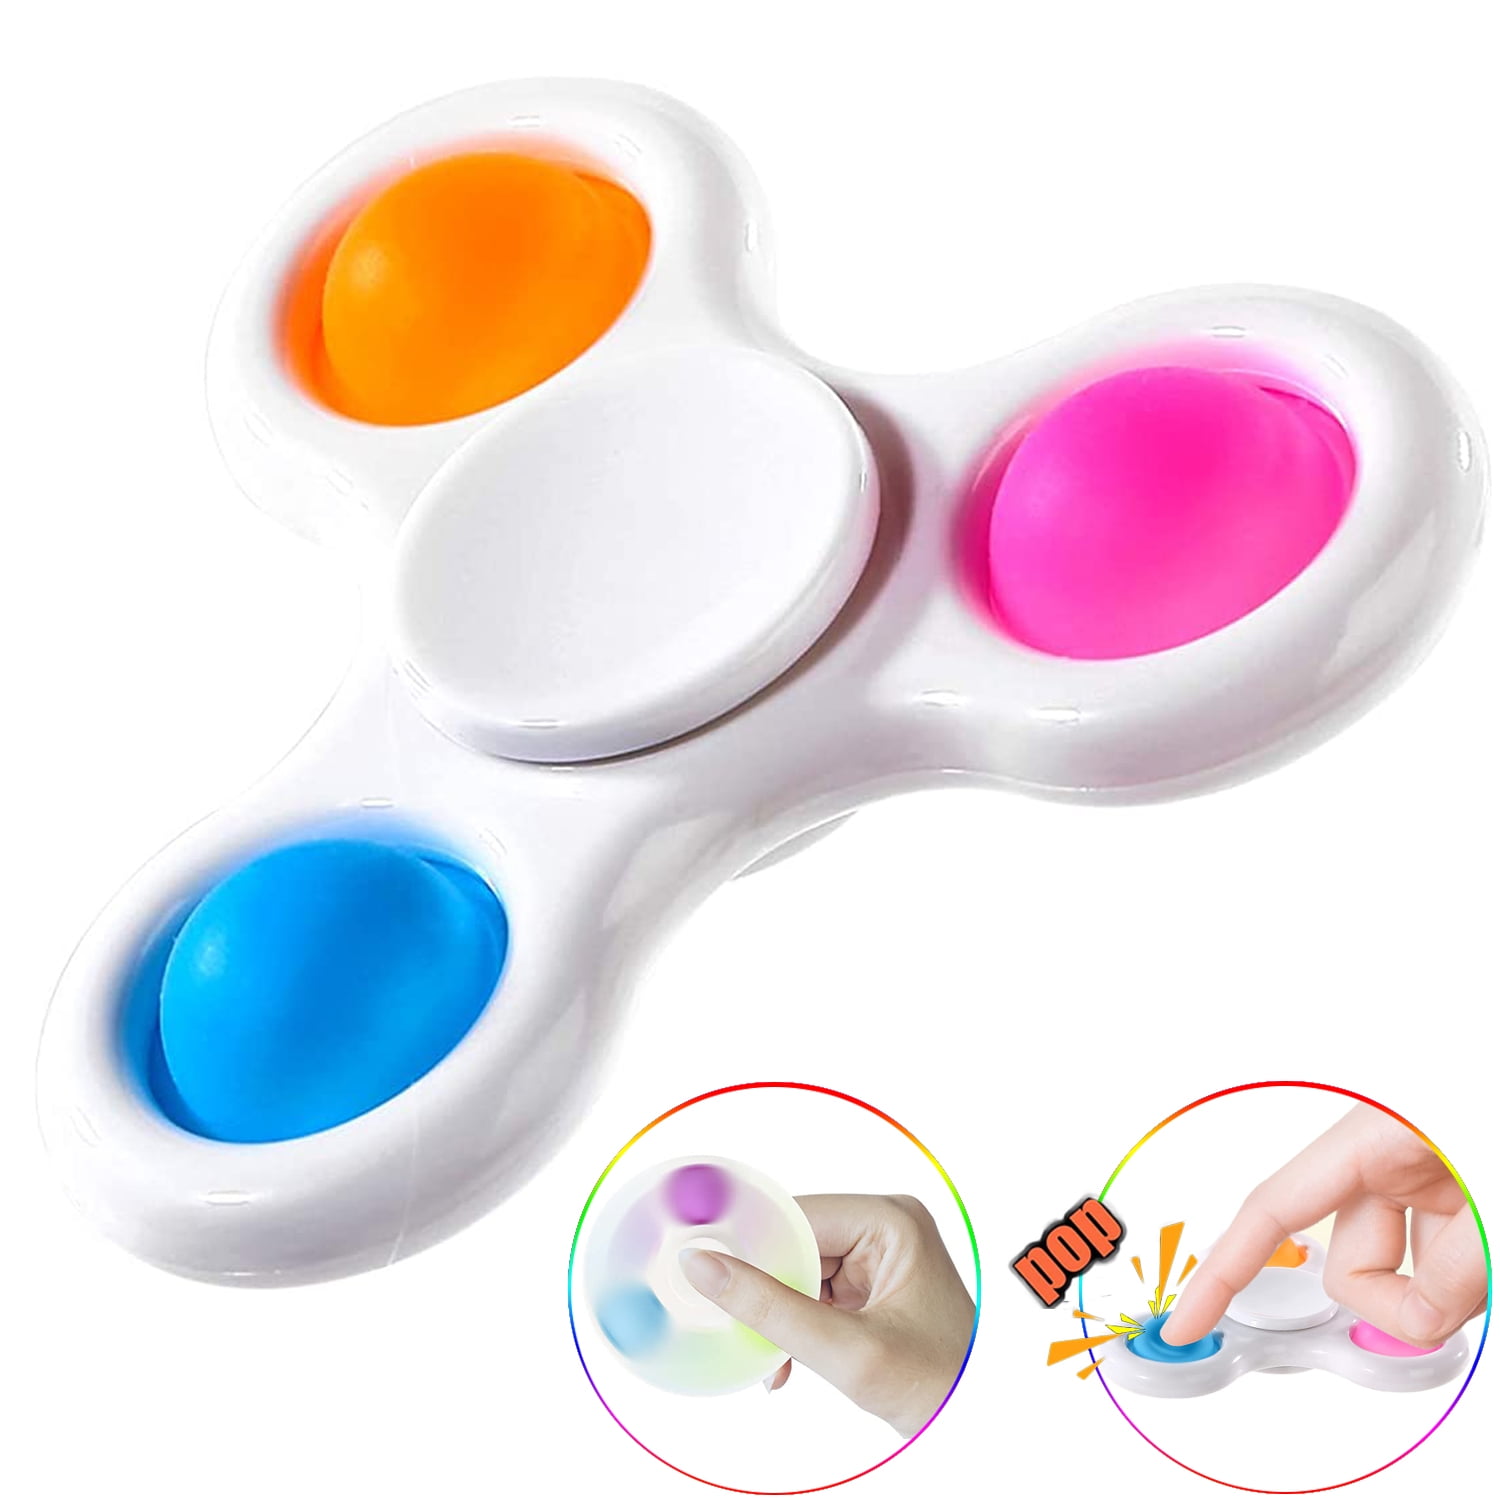 ZIMFANQI Pop It Spinners Toys Pop Its Simple Dimple Fidgets Popper Mini Push-popping Bubble Fidget Sensory Toy Hands Spinner Autism Anxiety Stress Relief Toys Gifts for Kids Adults - Walmart.com